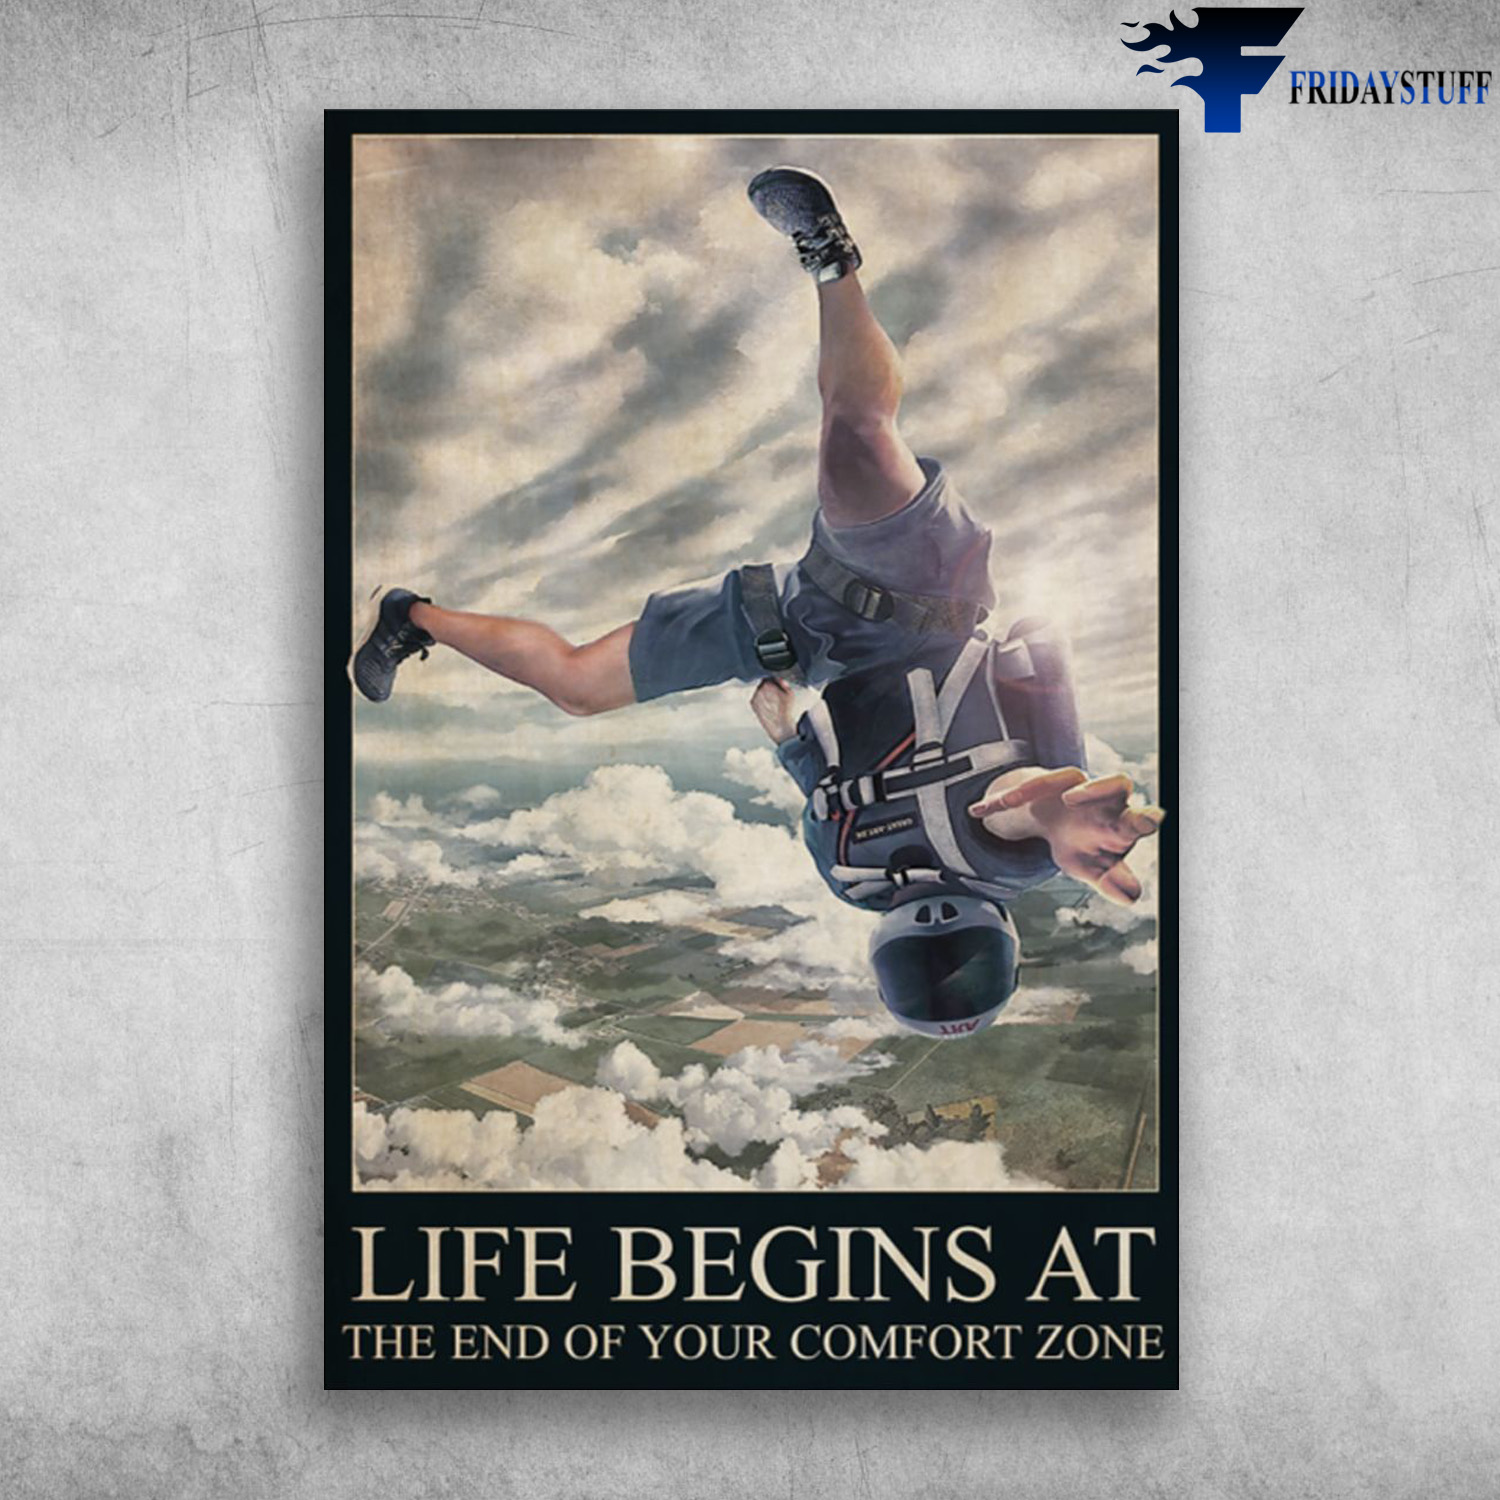 Skydiving Man - Life Begins At The End Of Your Comfort Zone